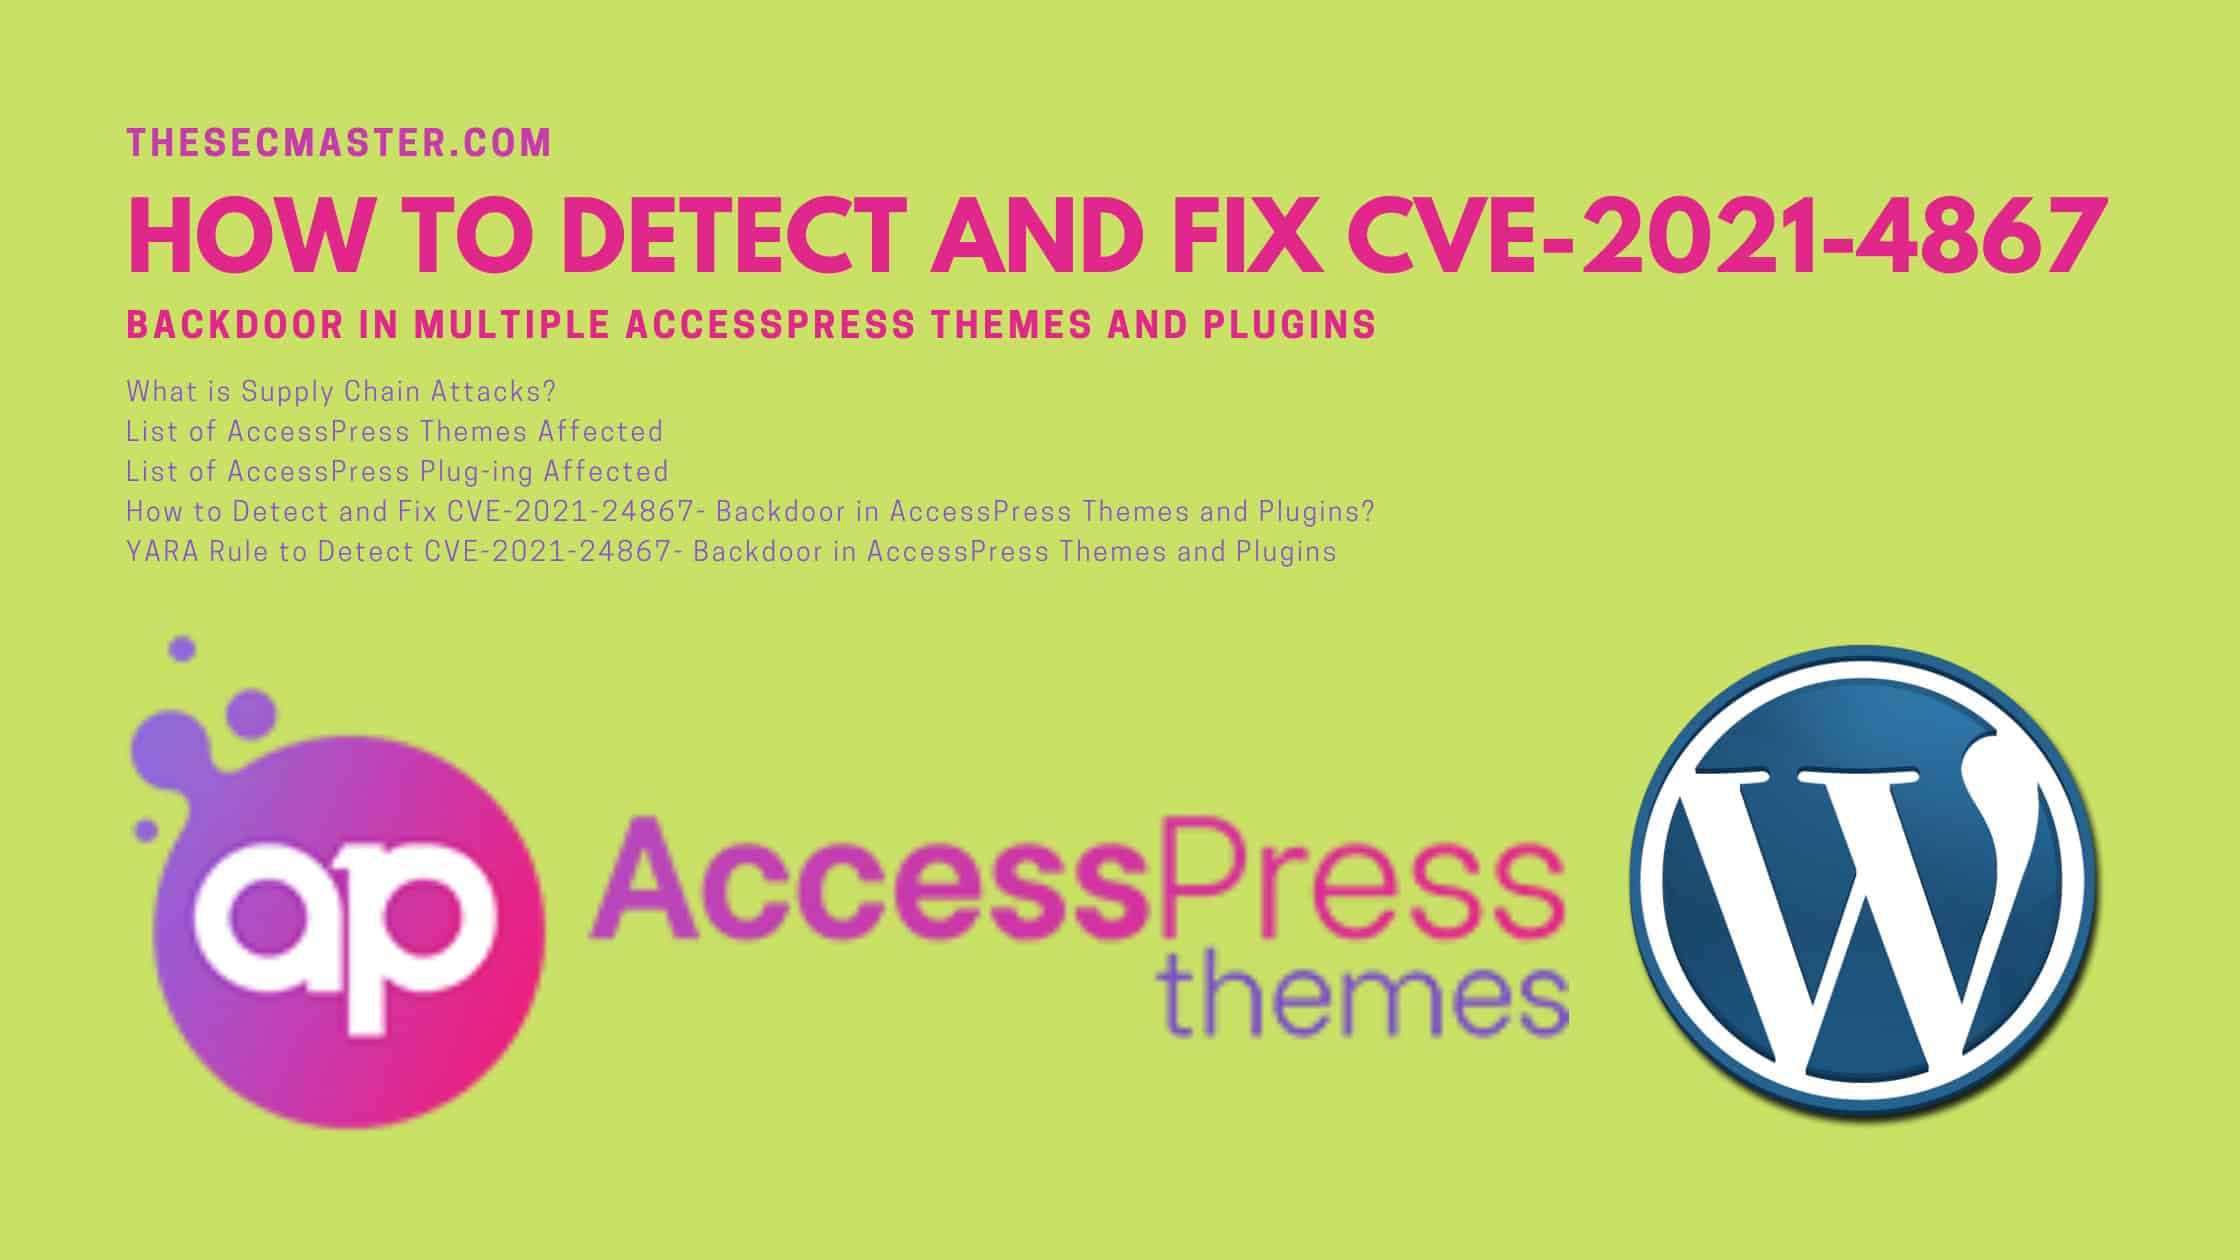 How To Detect And Fix Cve 2021 24867 Backdoor In Accesspress Themes And Plugins